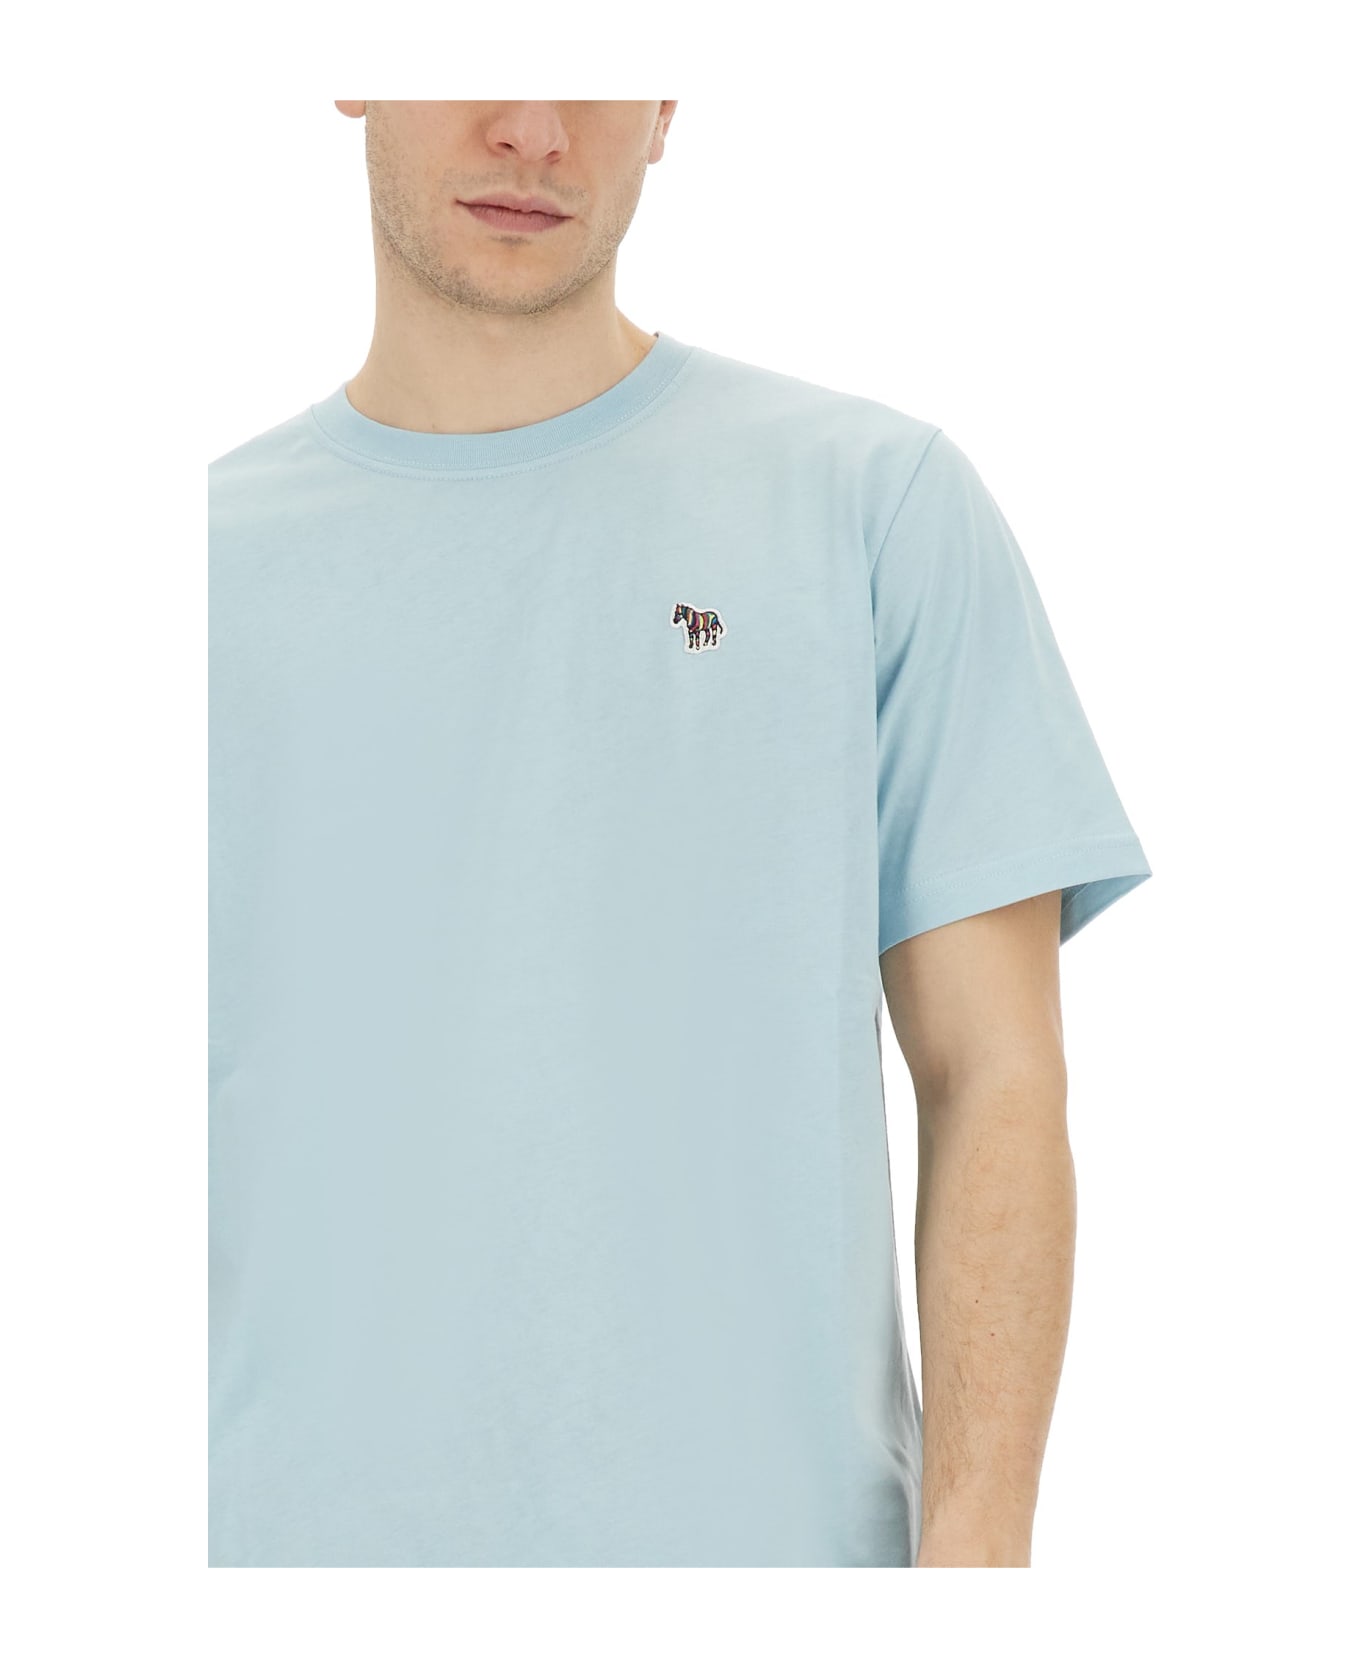 PS by Paul Smith Zebra T-shirt - Clear Blue